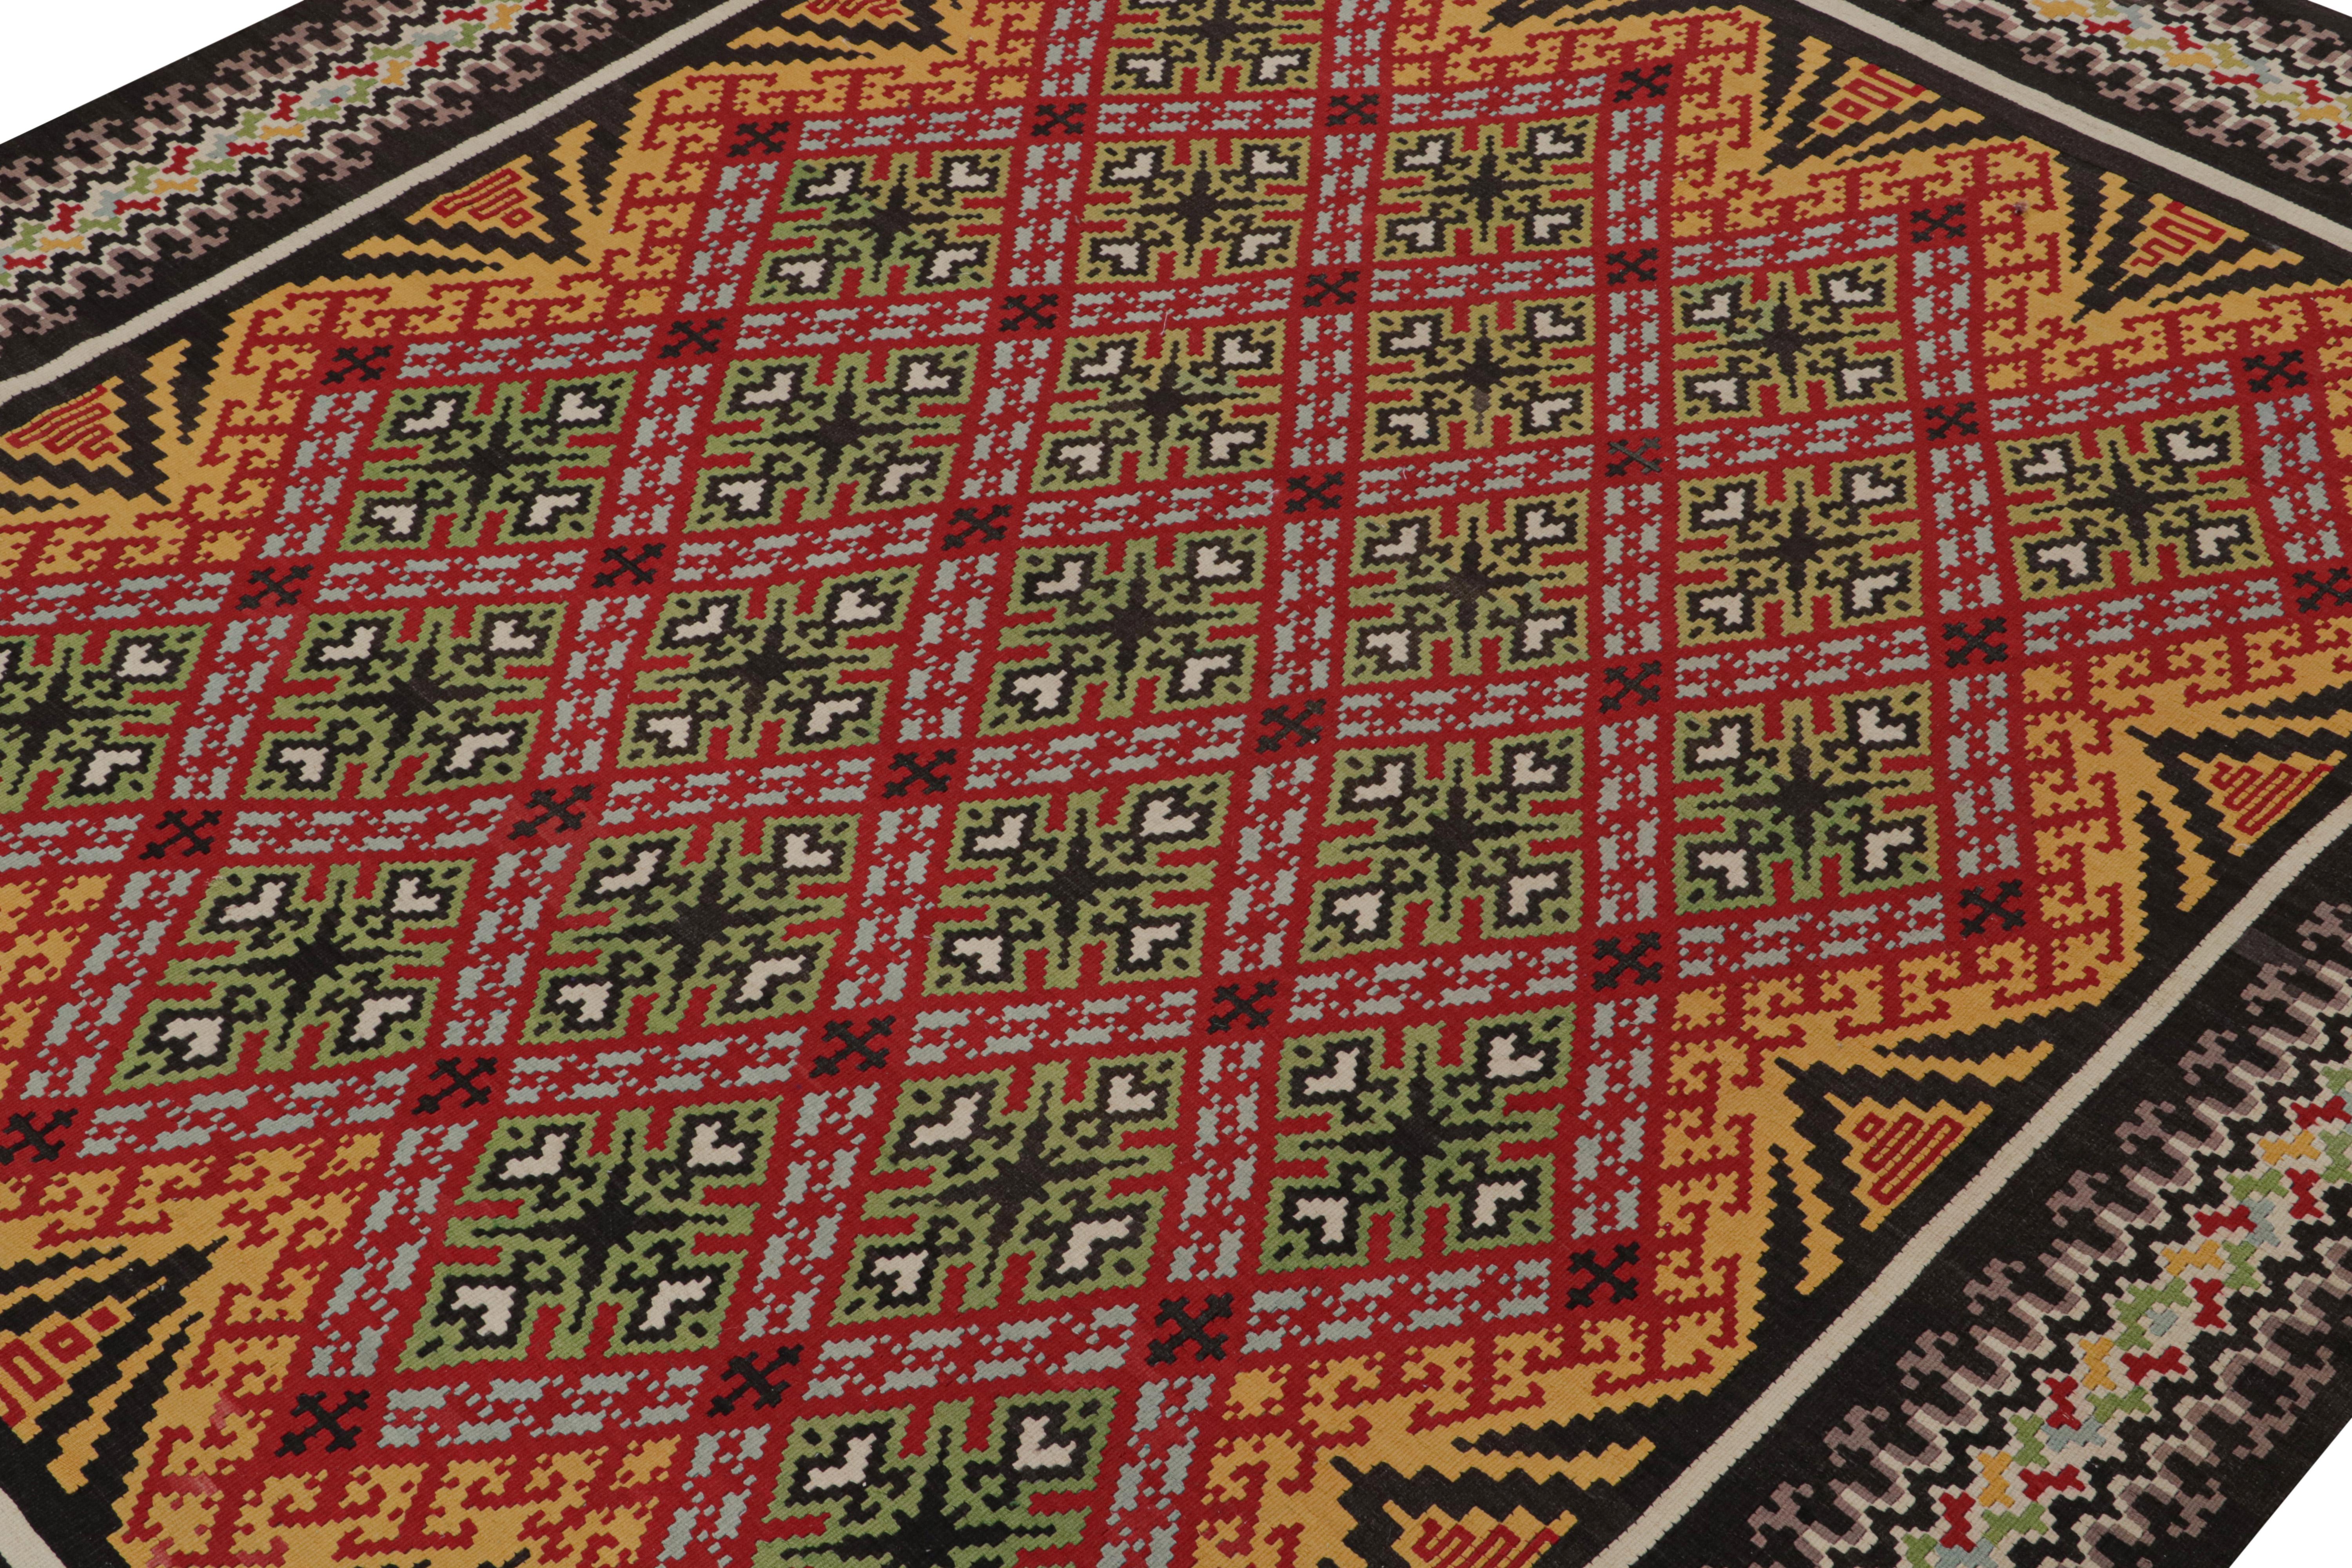 Turkish Vintage Balkan Kilim with Gold, Red & Green Geometric Patterns from Rug & Kilim For Sale